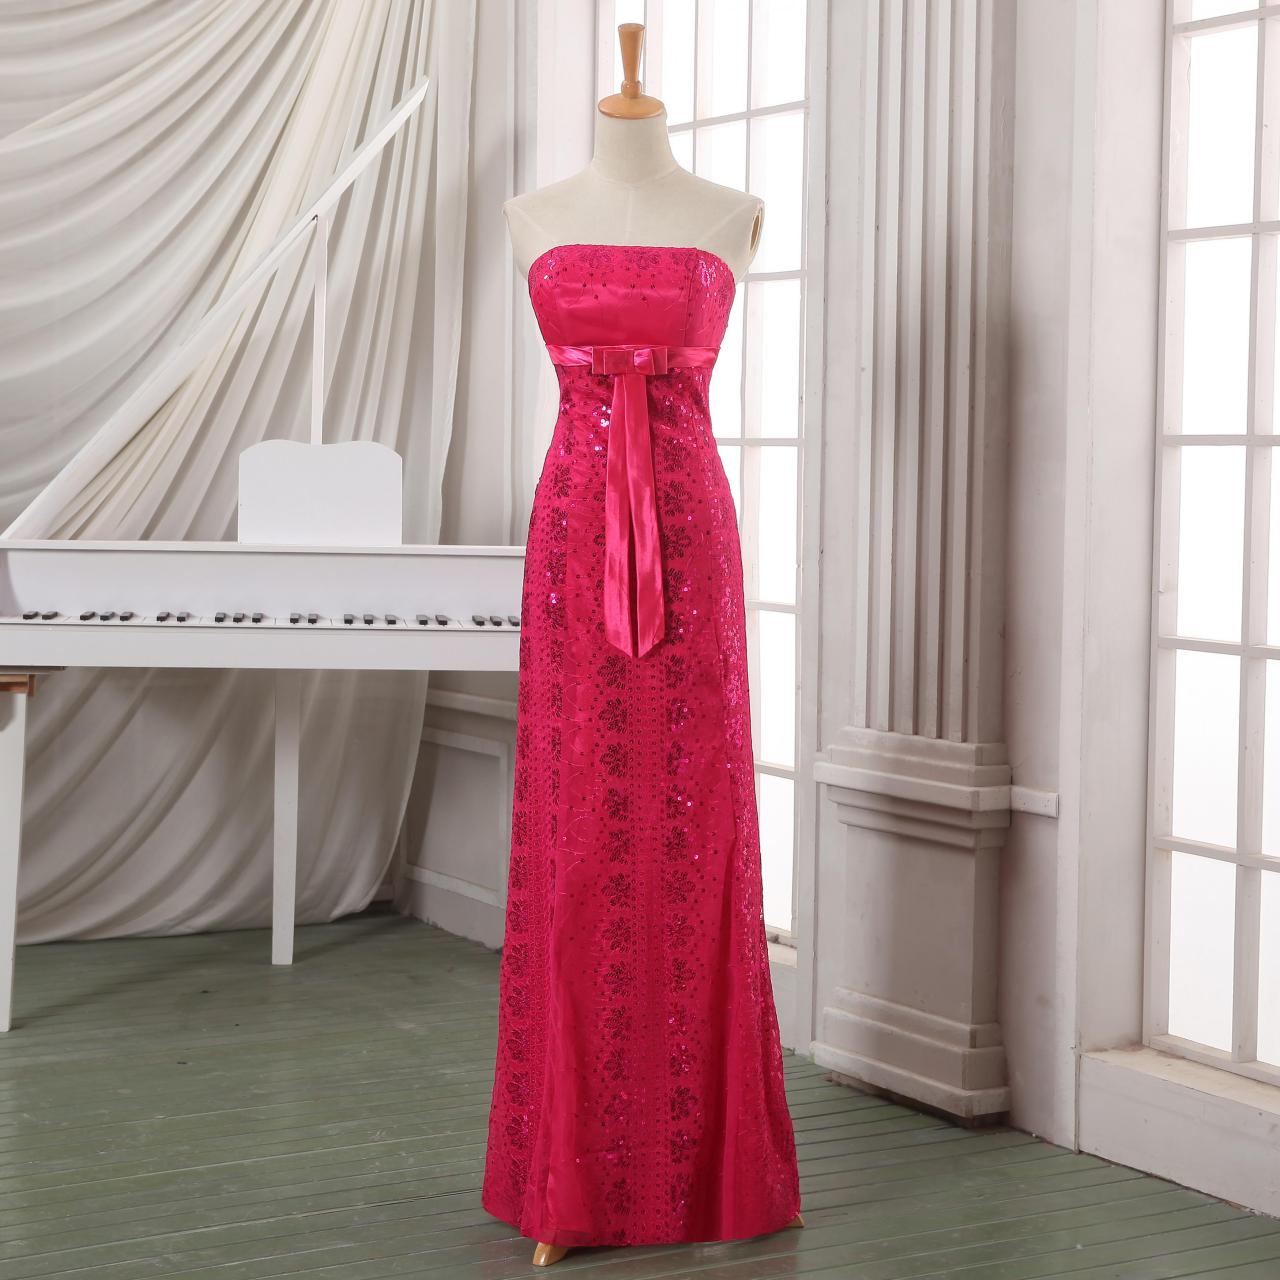 Pink Bandeau Neckline Full Length Prom Dress With Sequins And Ribbon Sash